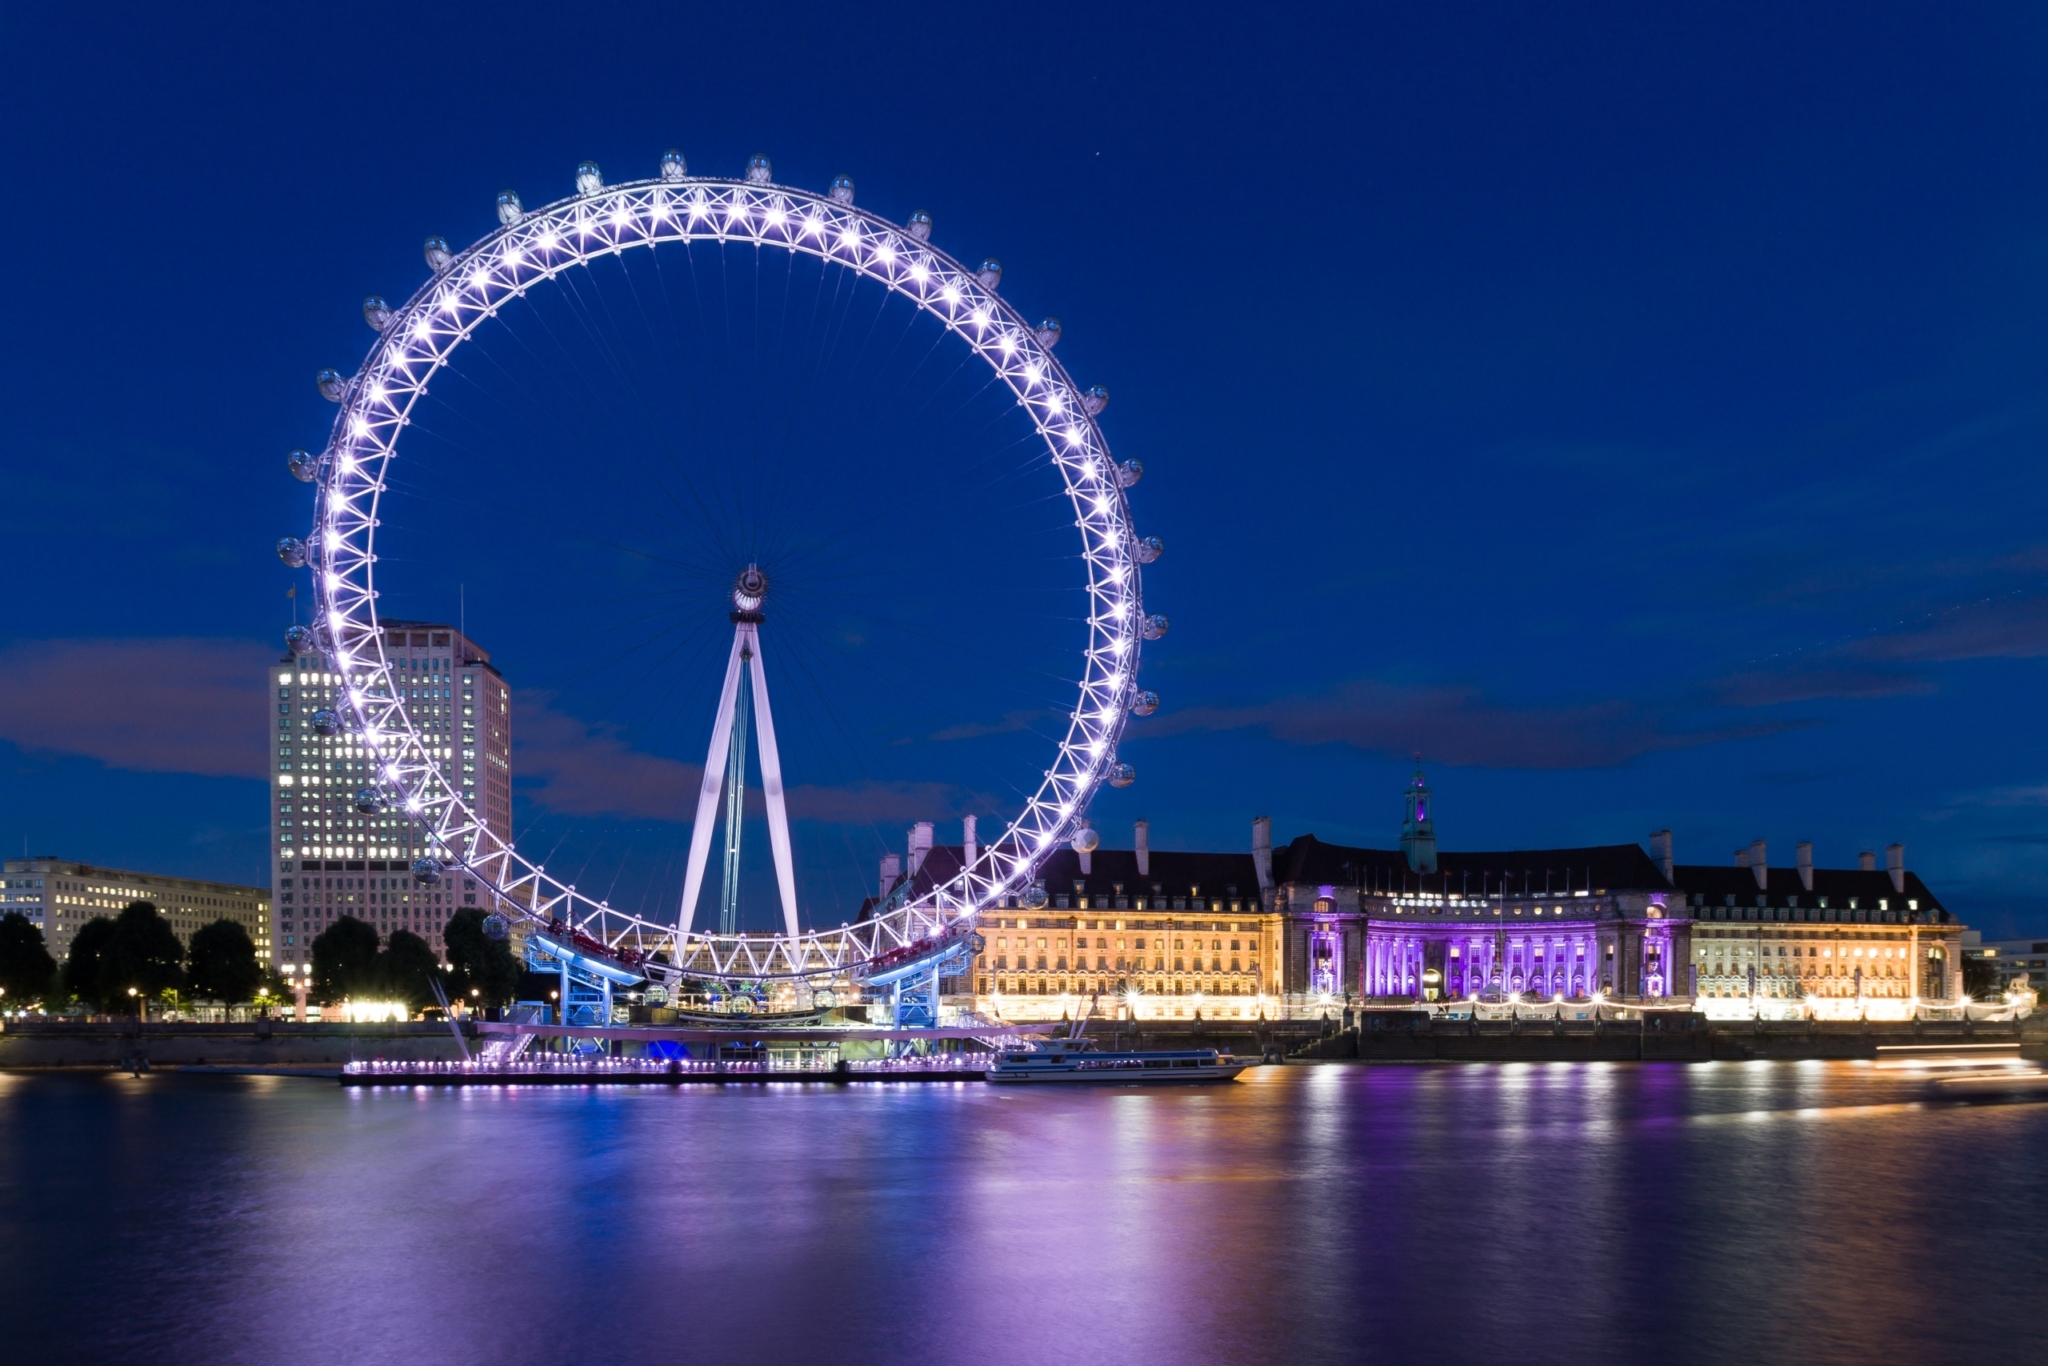 London Eye at Dawn - Stunning View of the City